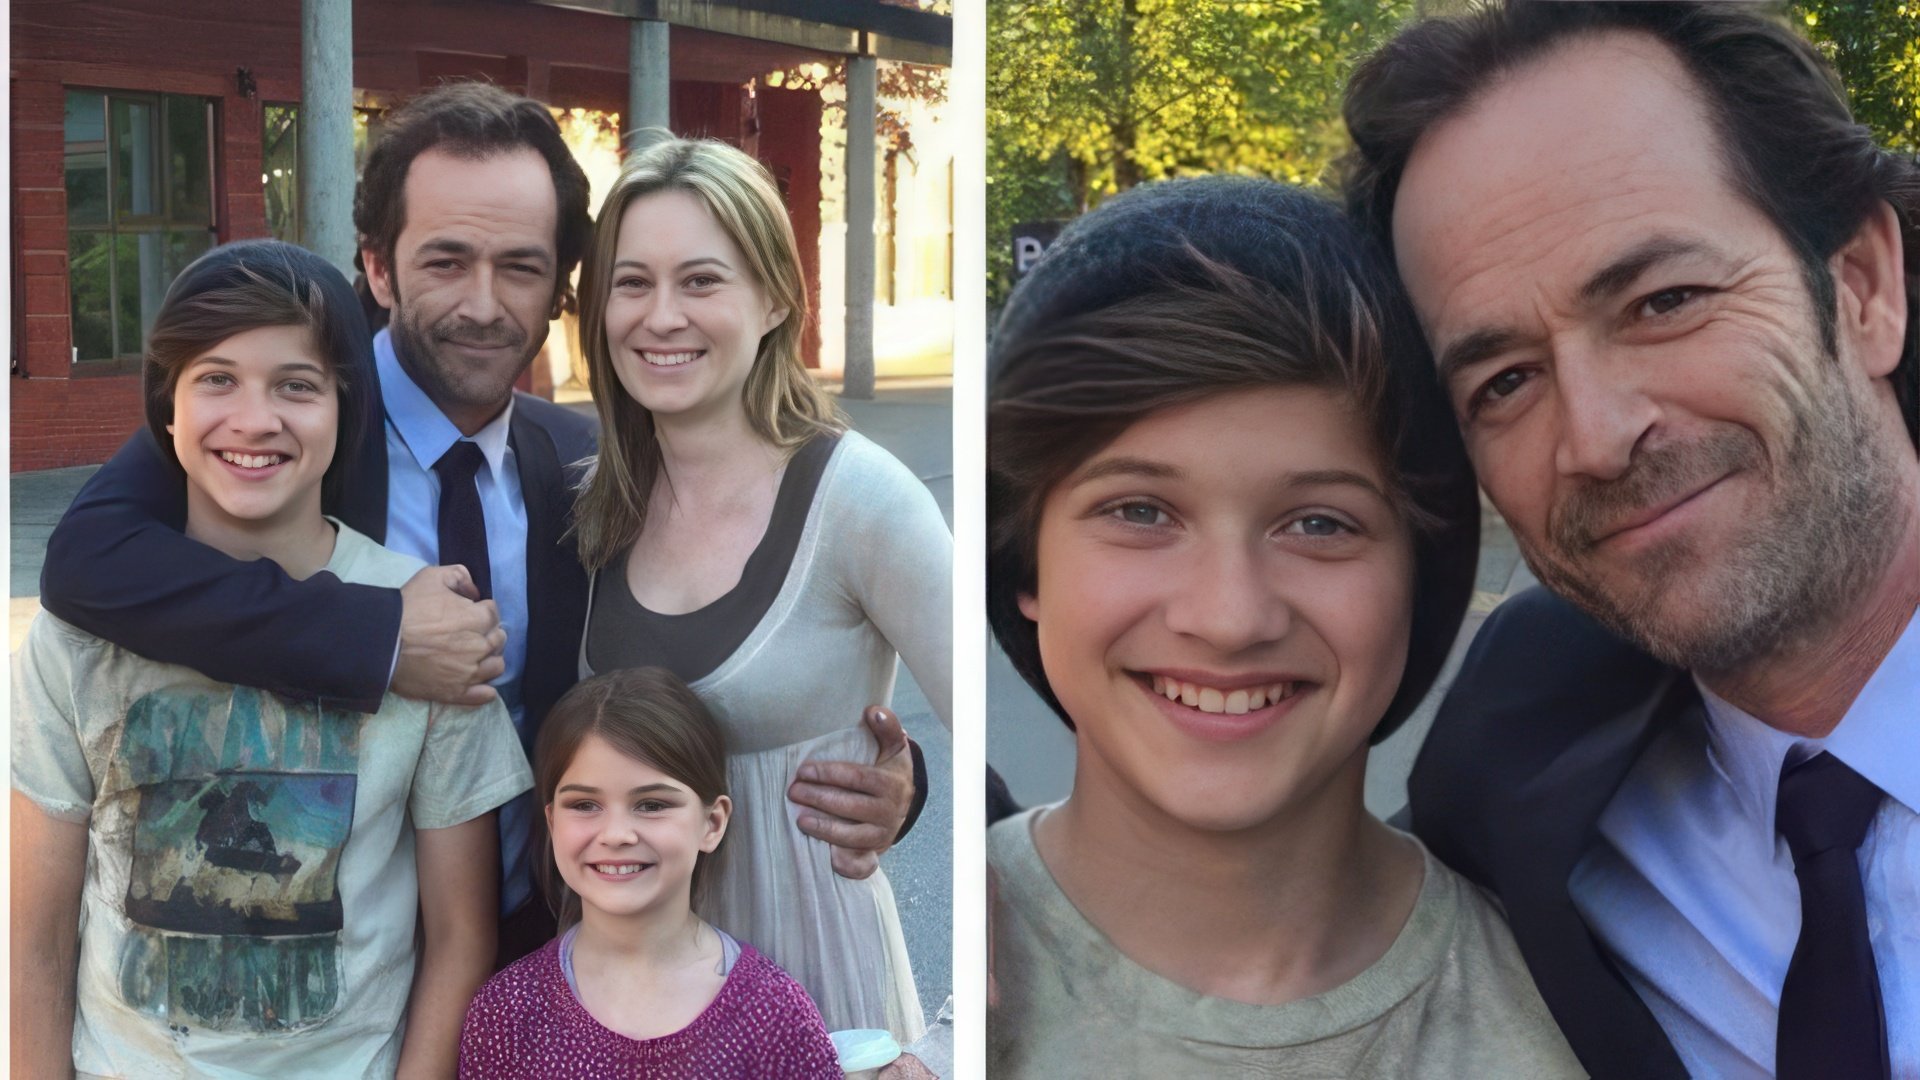 Luke Perry and his children